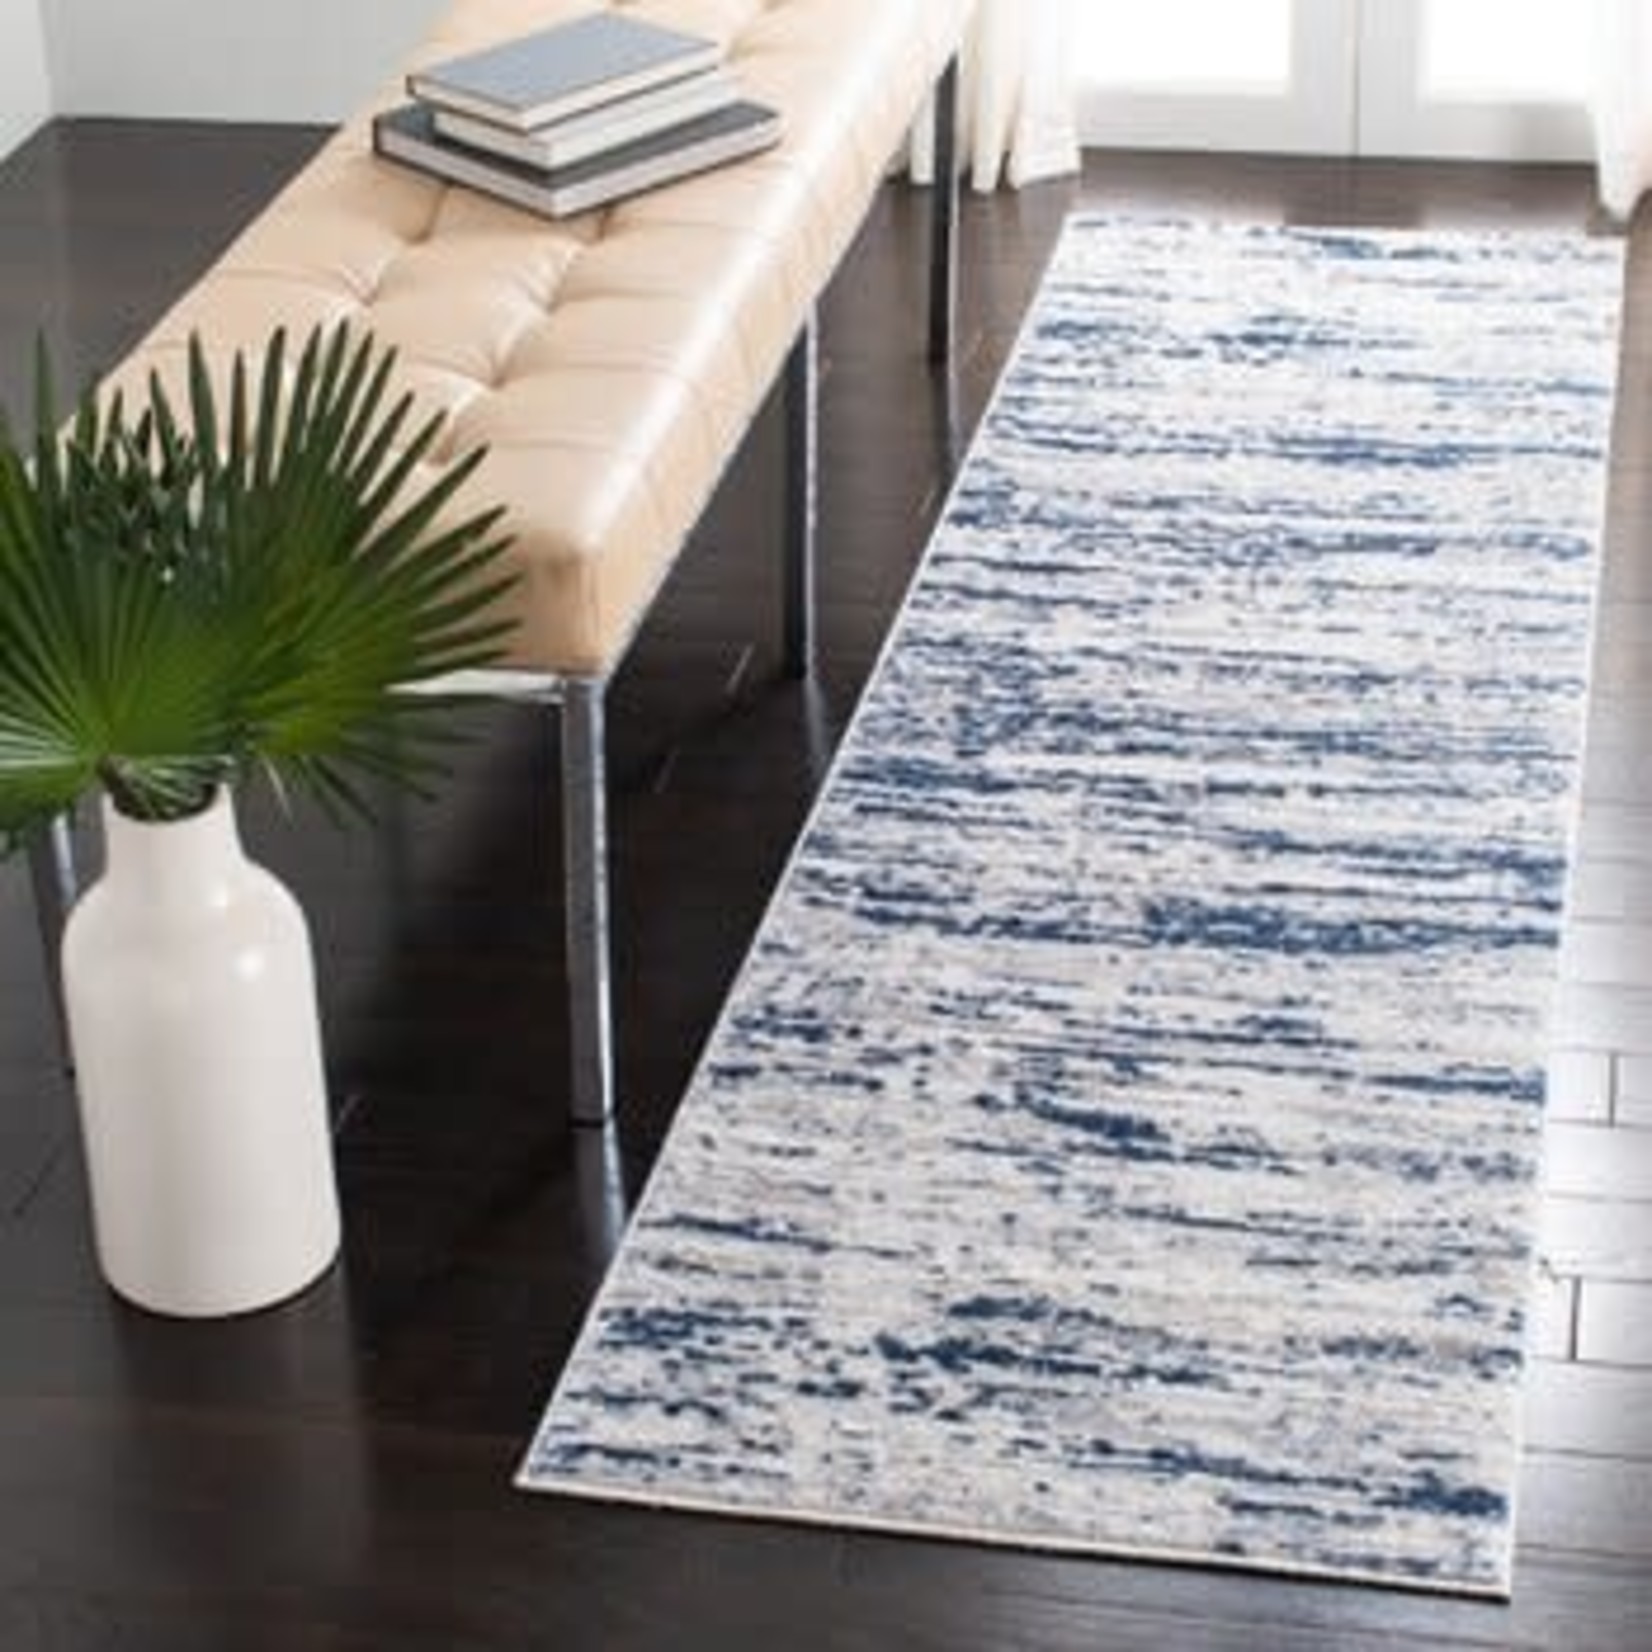 *2'2 x 12' Greely Abstract Navy/Grey Area Rug - Dirt on back edge